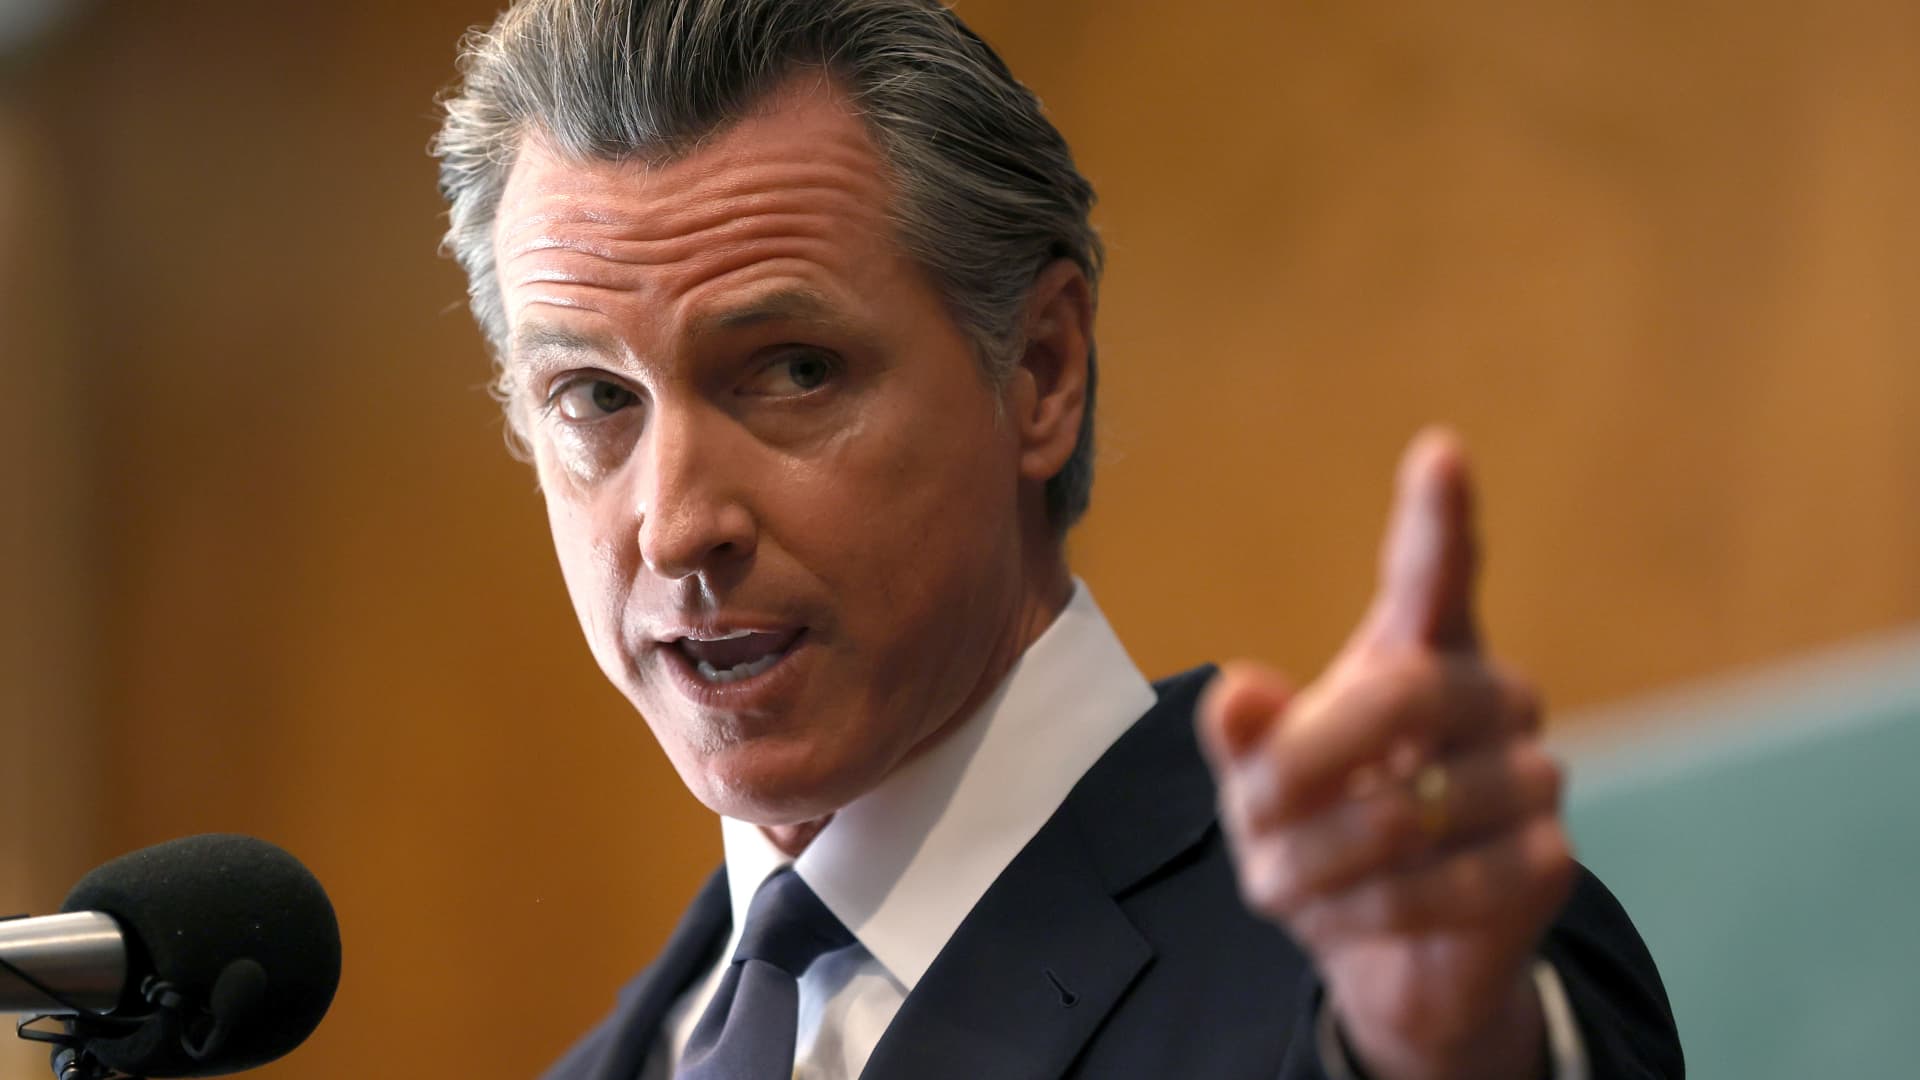 California governor Newsom says state won't do business with Walgreens